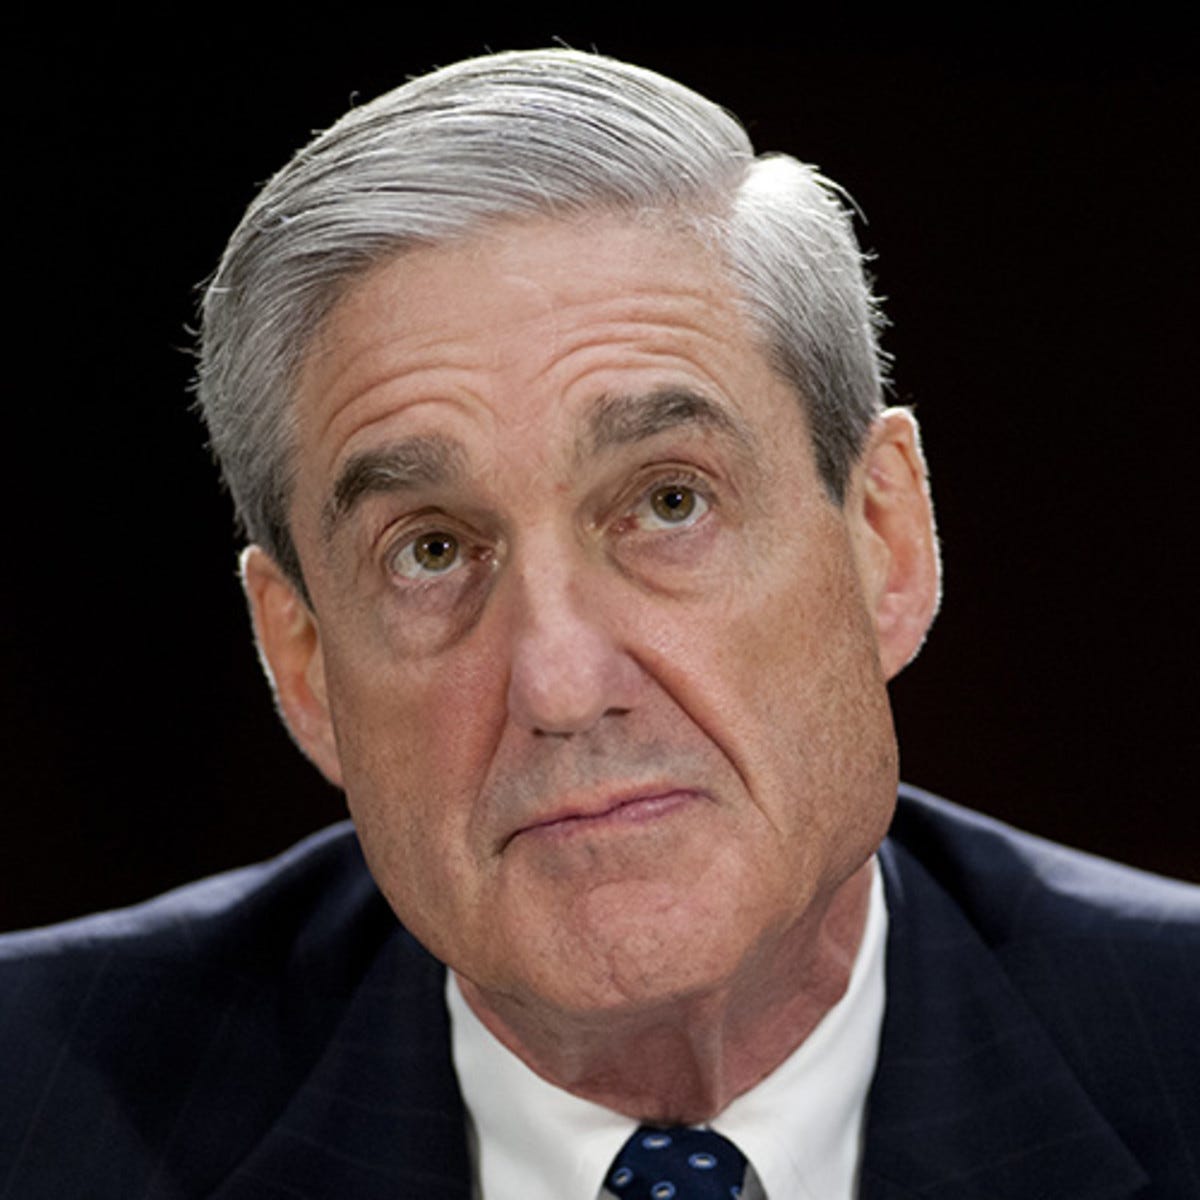 Robert Mueller - Education, Special Counsel & Life - Biography